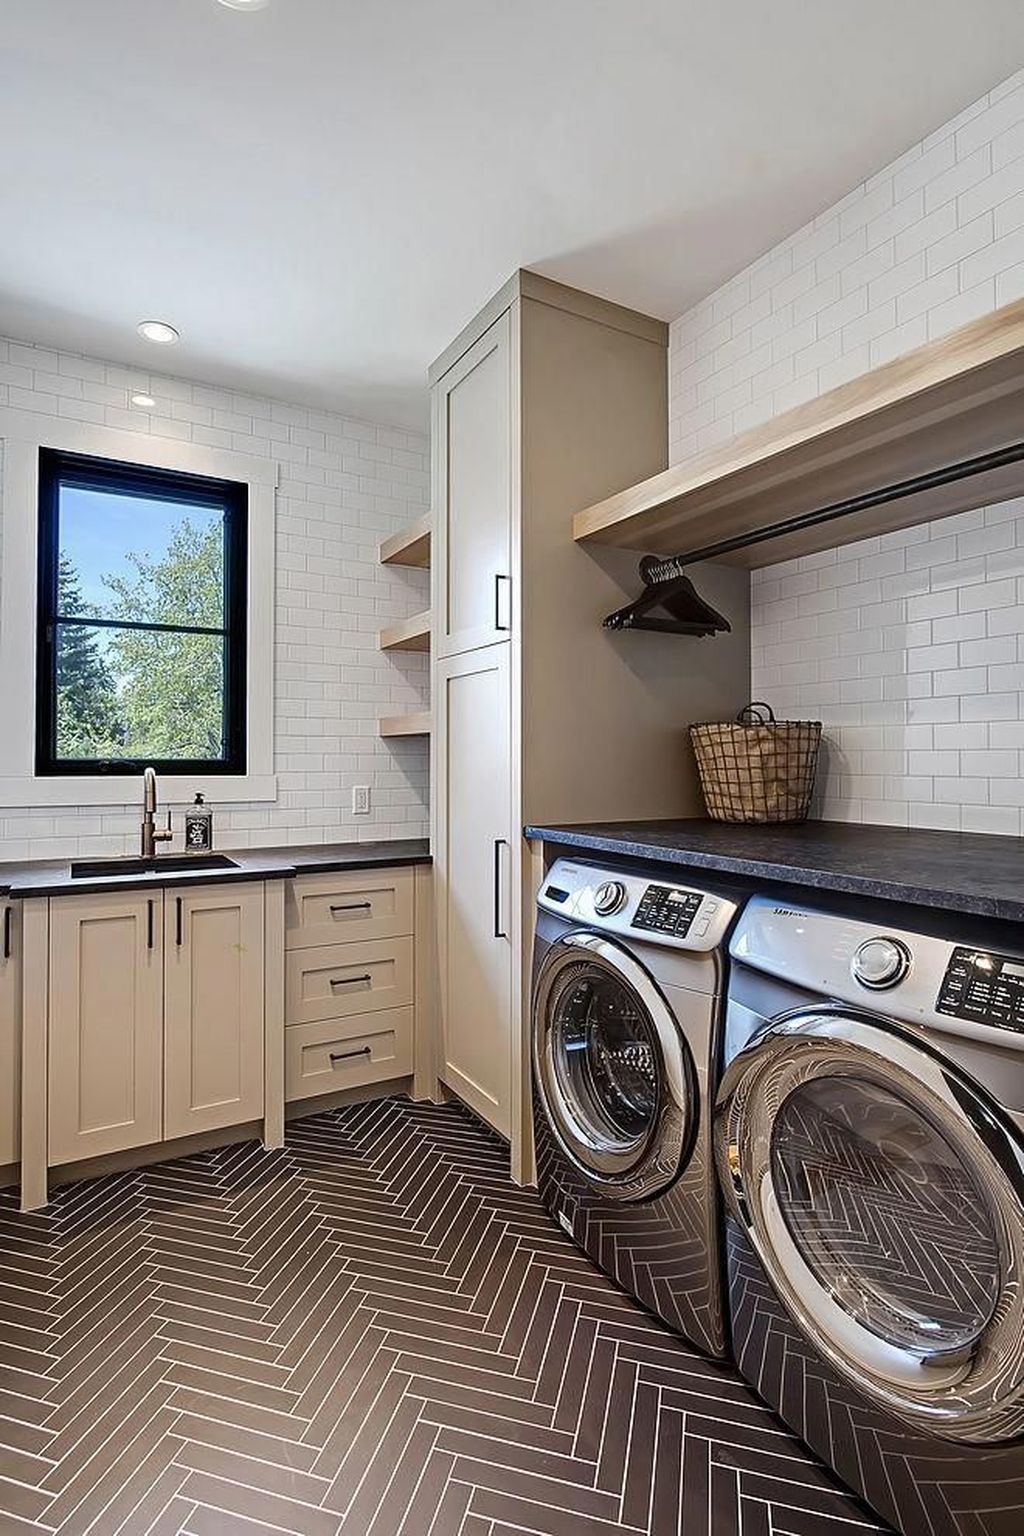 38 The Best Laundry Room Design Ideas You Must Have HMDCRTN